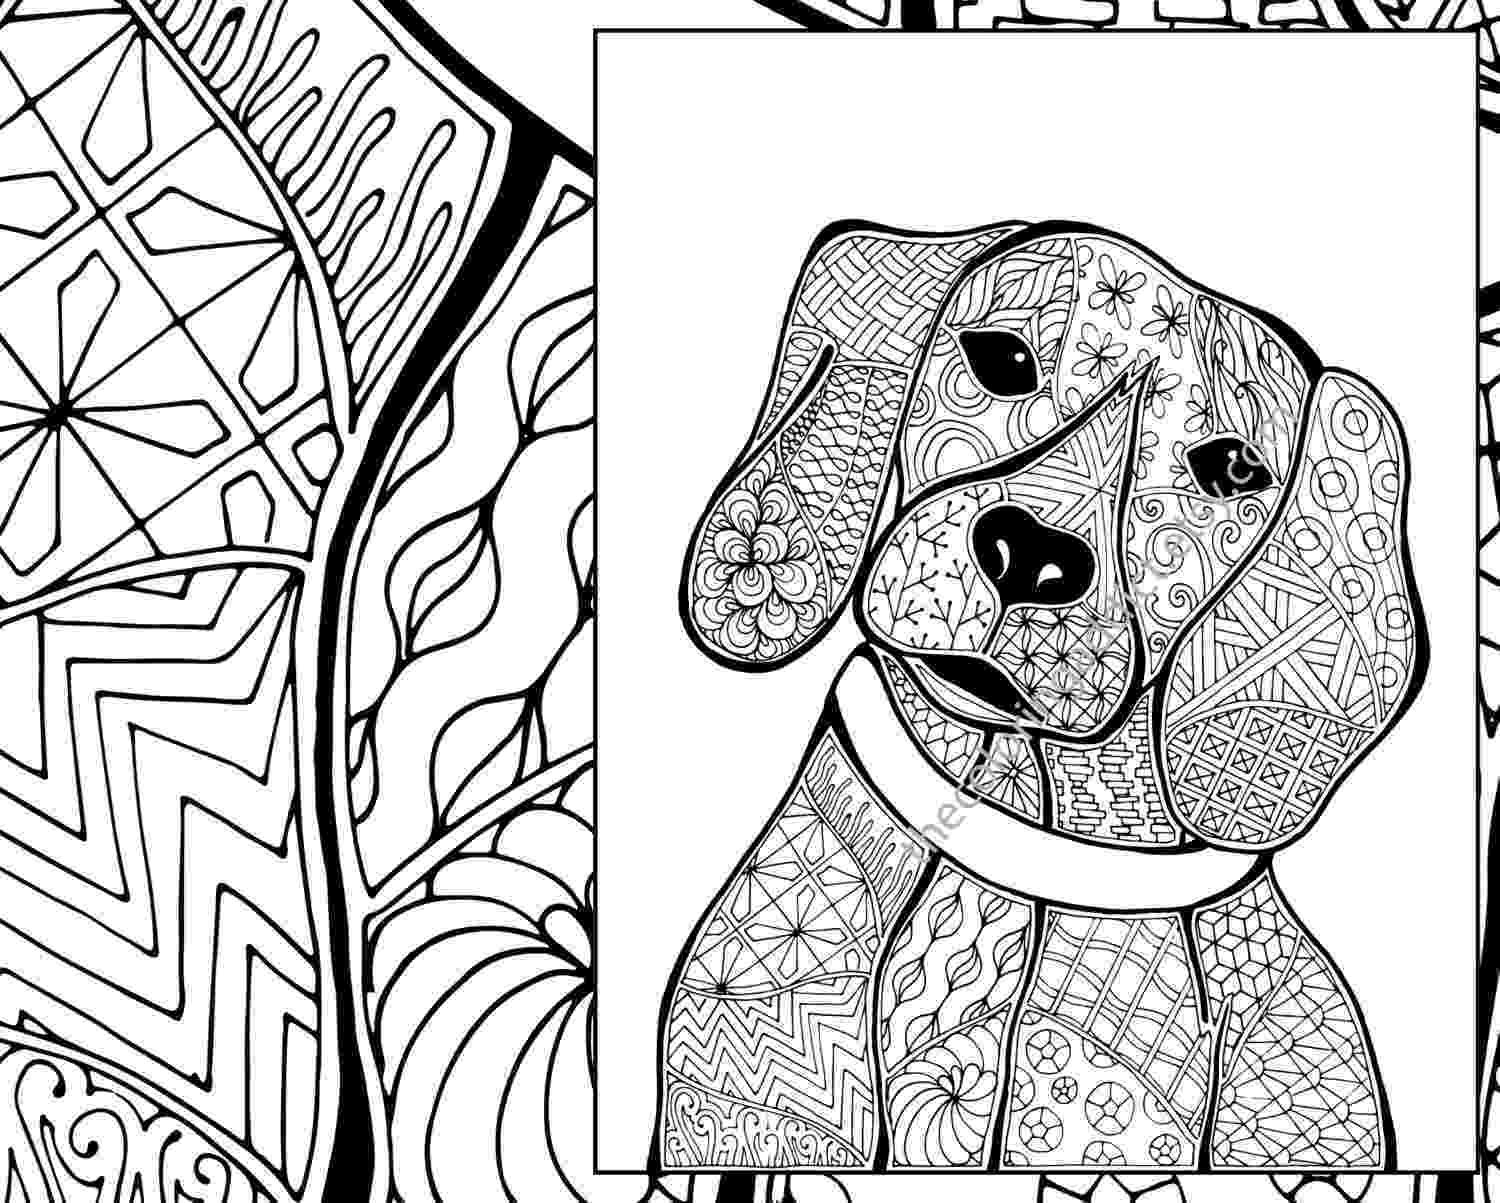 color zentangle zentangle dog colouring page animal colouring zentangle zentangle color 